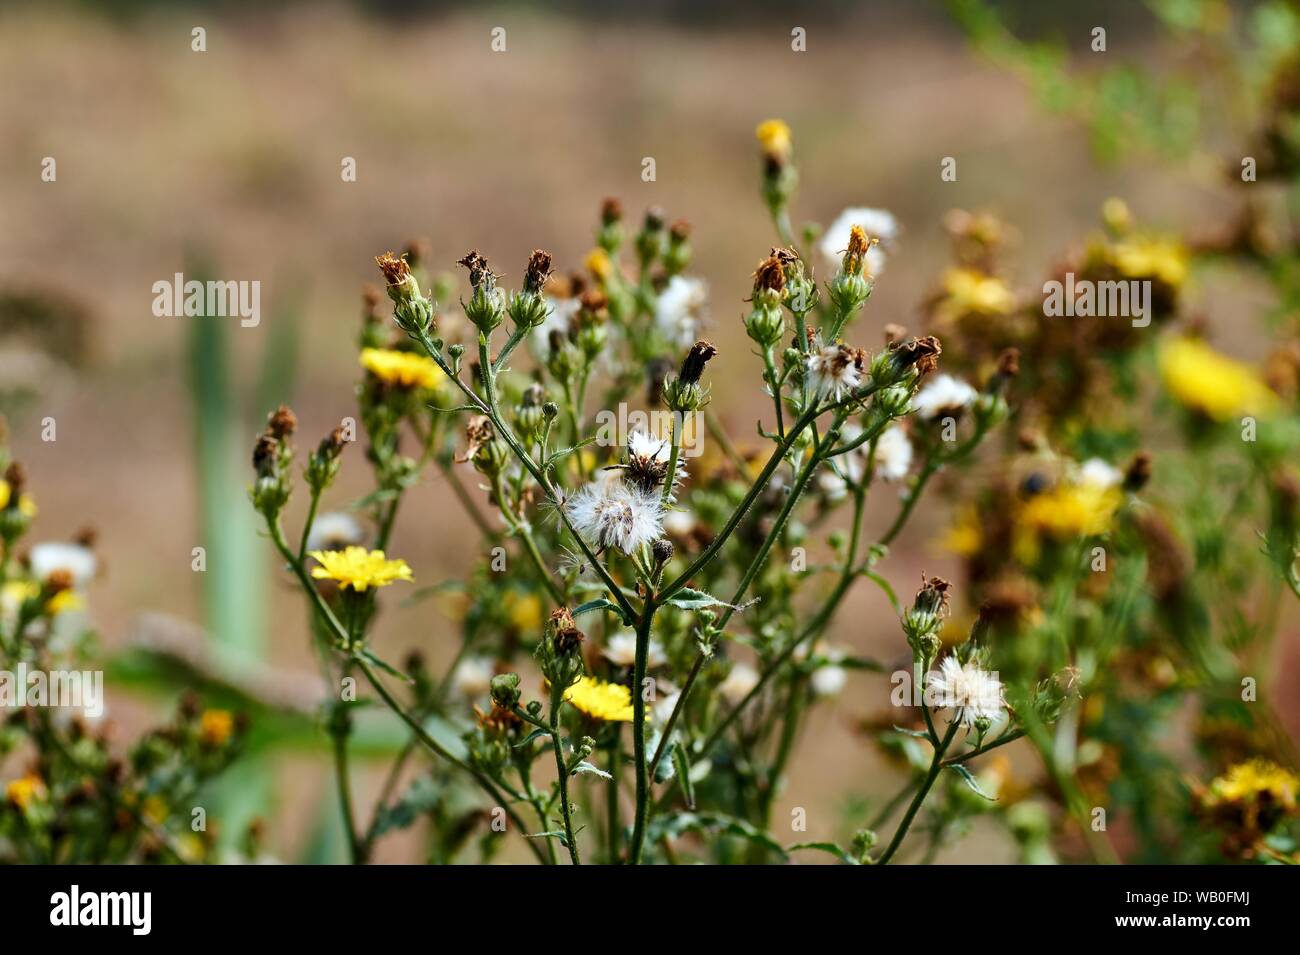 Carlina biebersteinii plant at field at nature. Carlina vulgaris or Carline thistle, family Asteraceae. Stock Photo